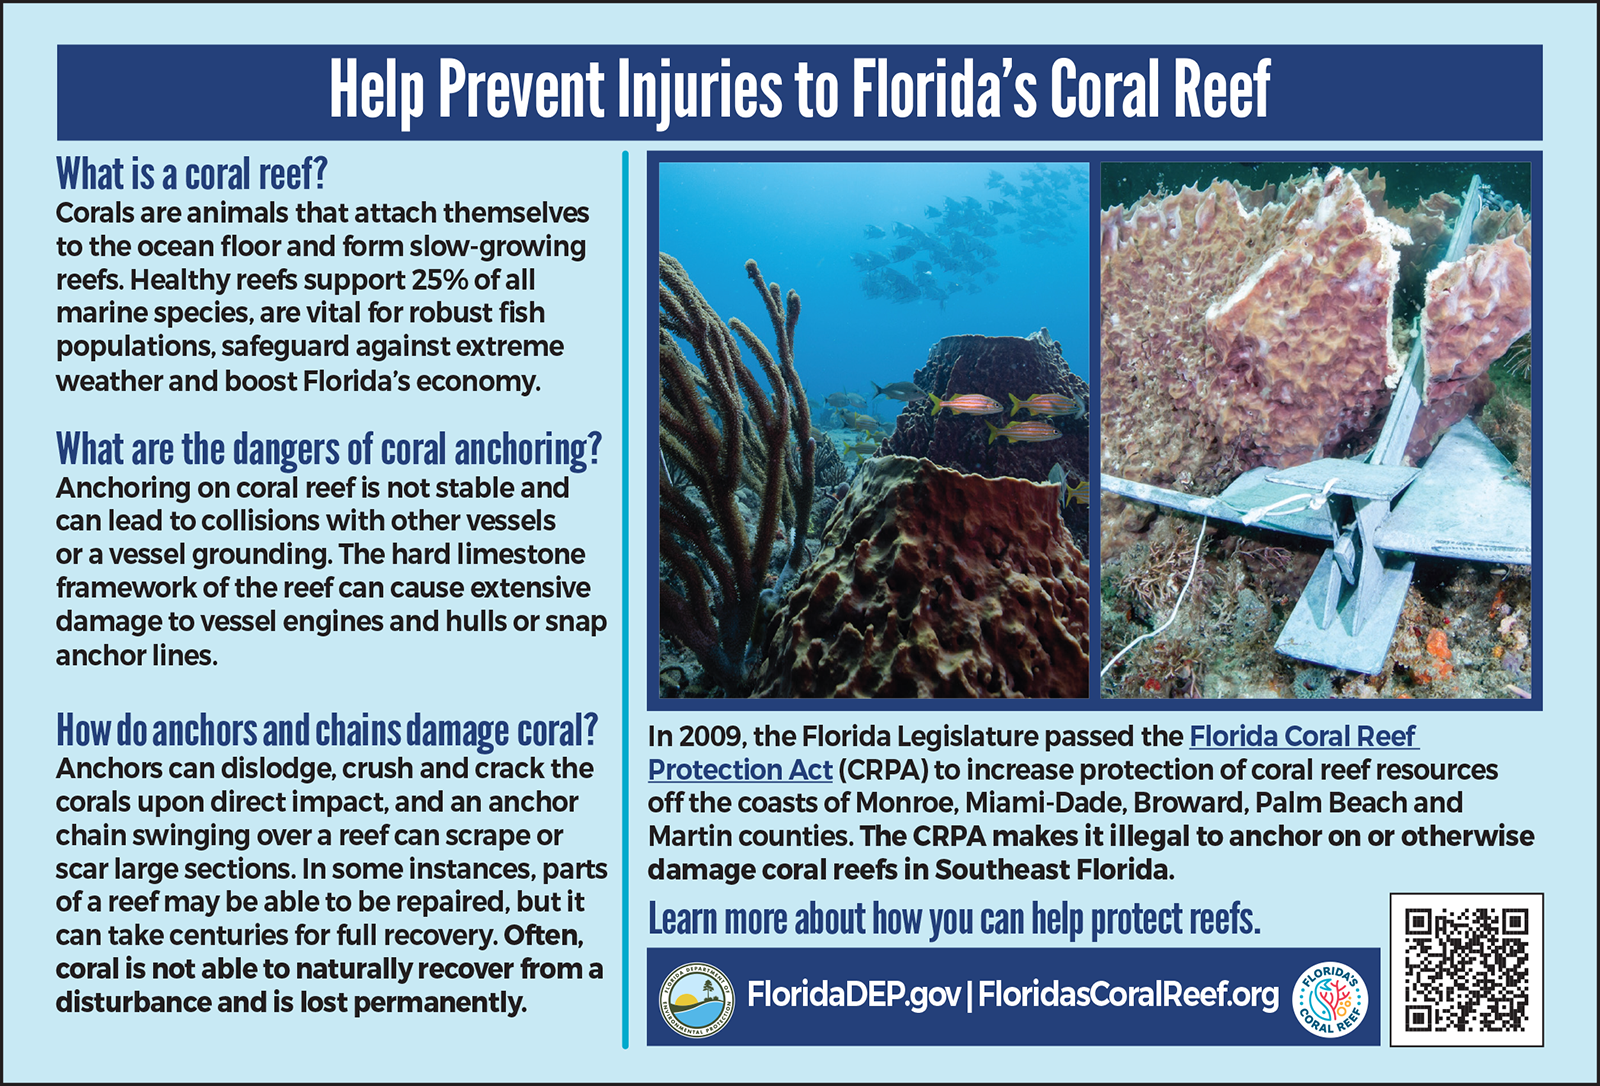 Ad for coral reef injury prevention